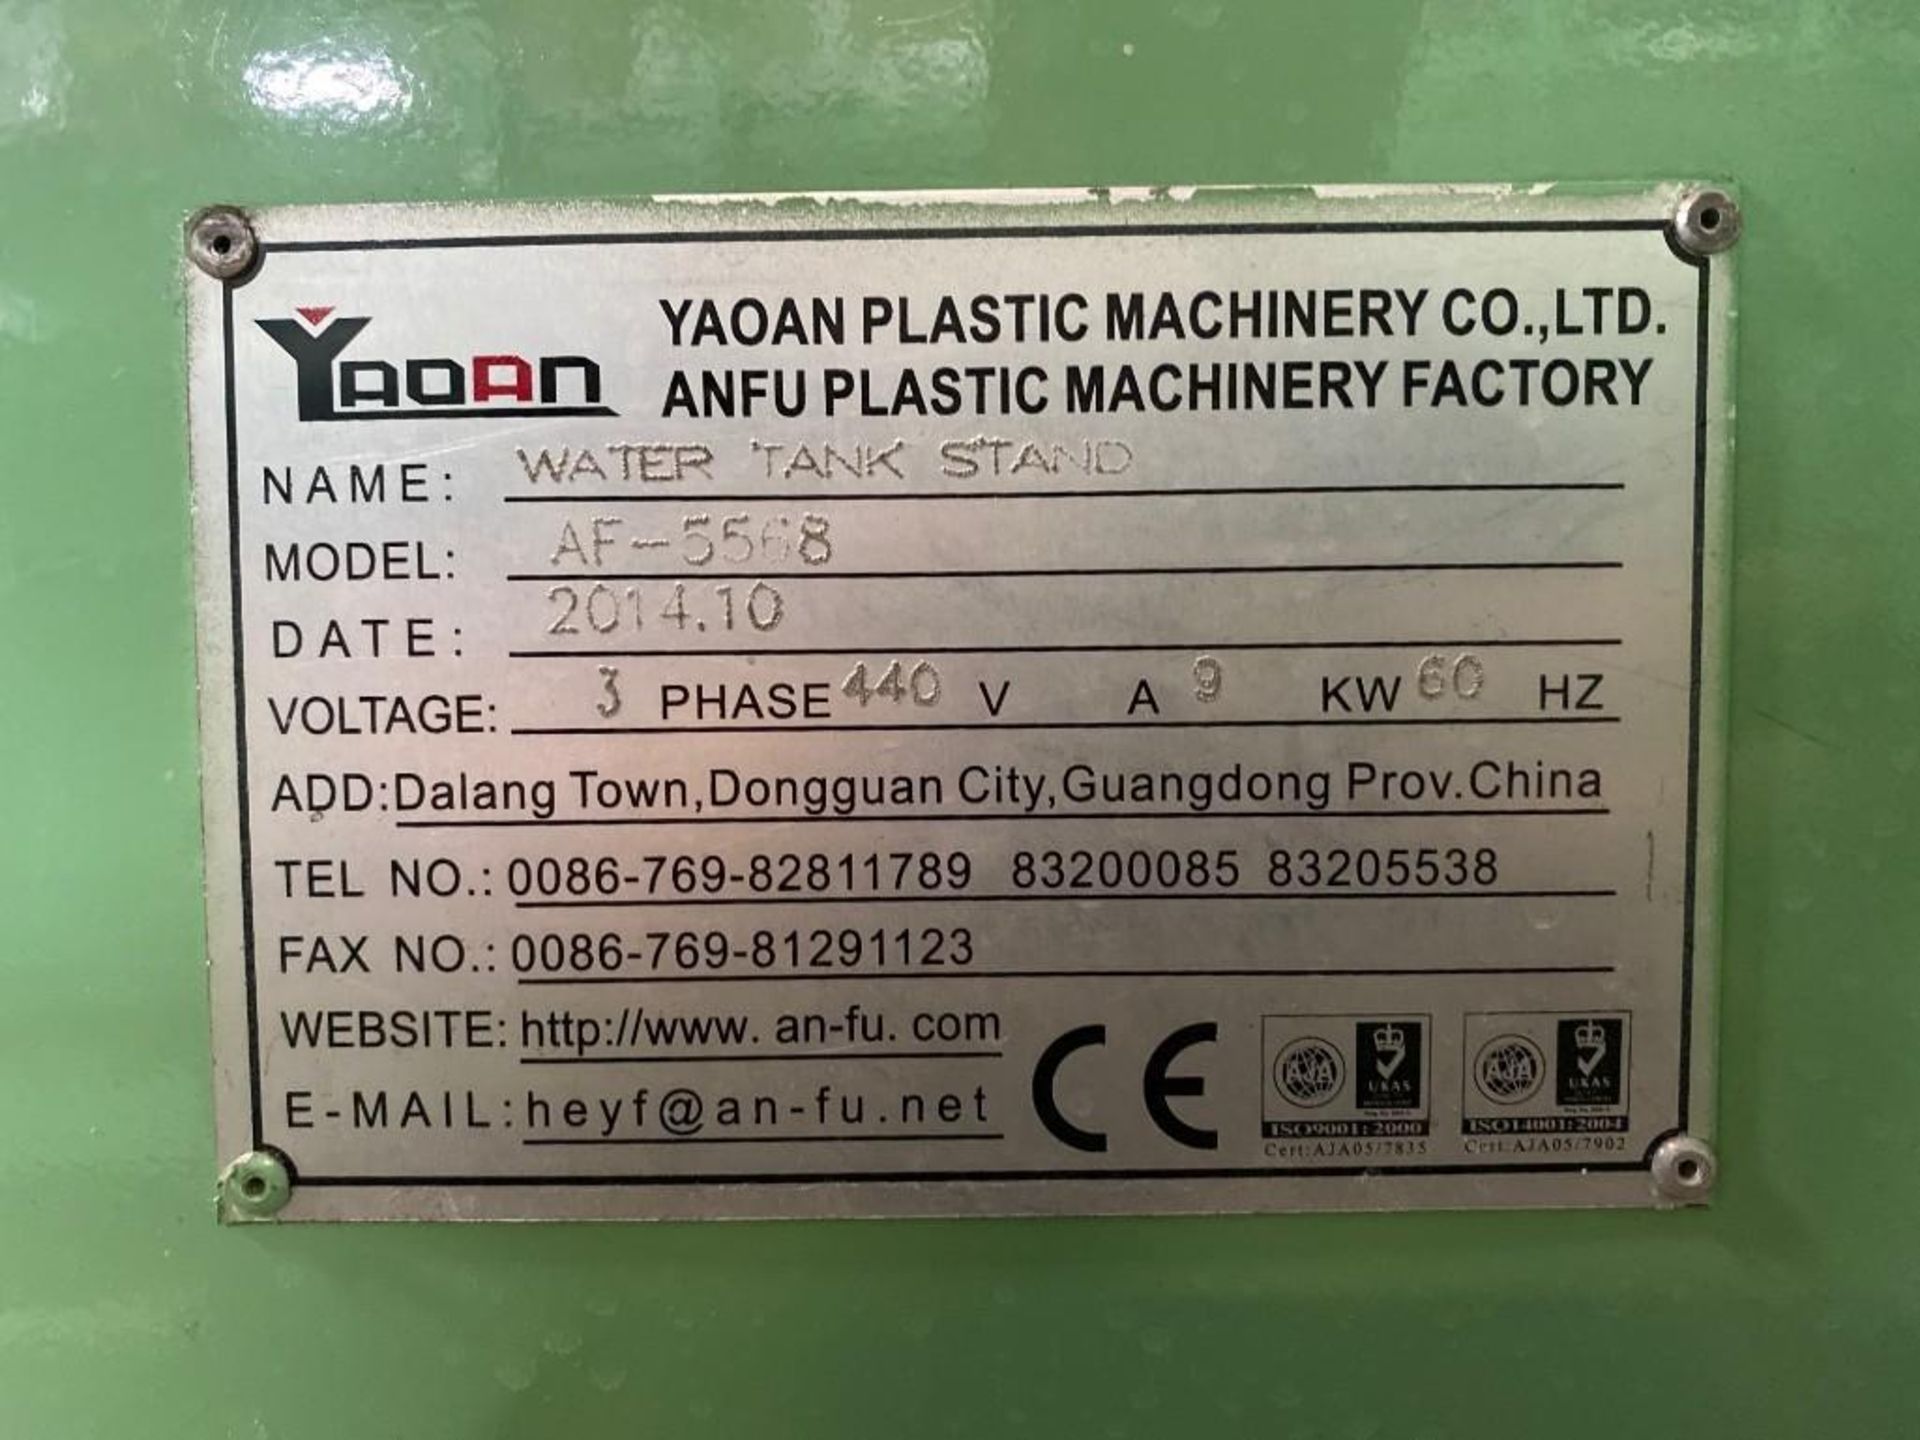 Yaoan AF-5568 Vacuum Water Tank Stand, New 2014 - Image 7 of 7